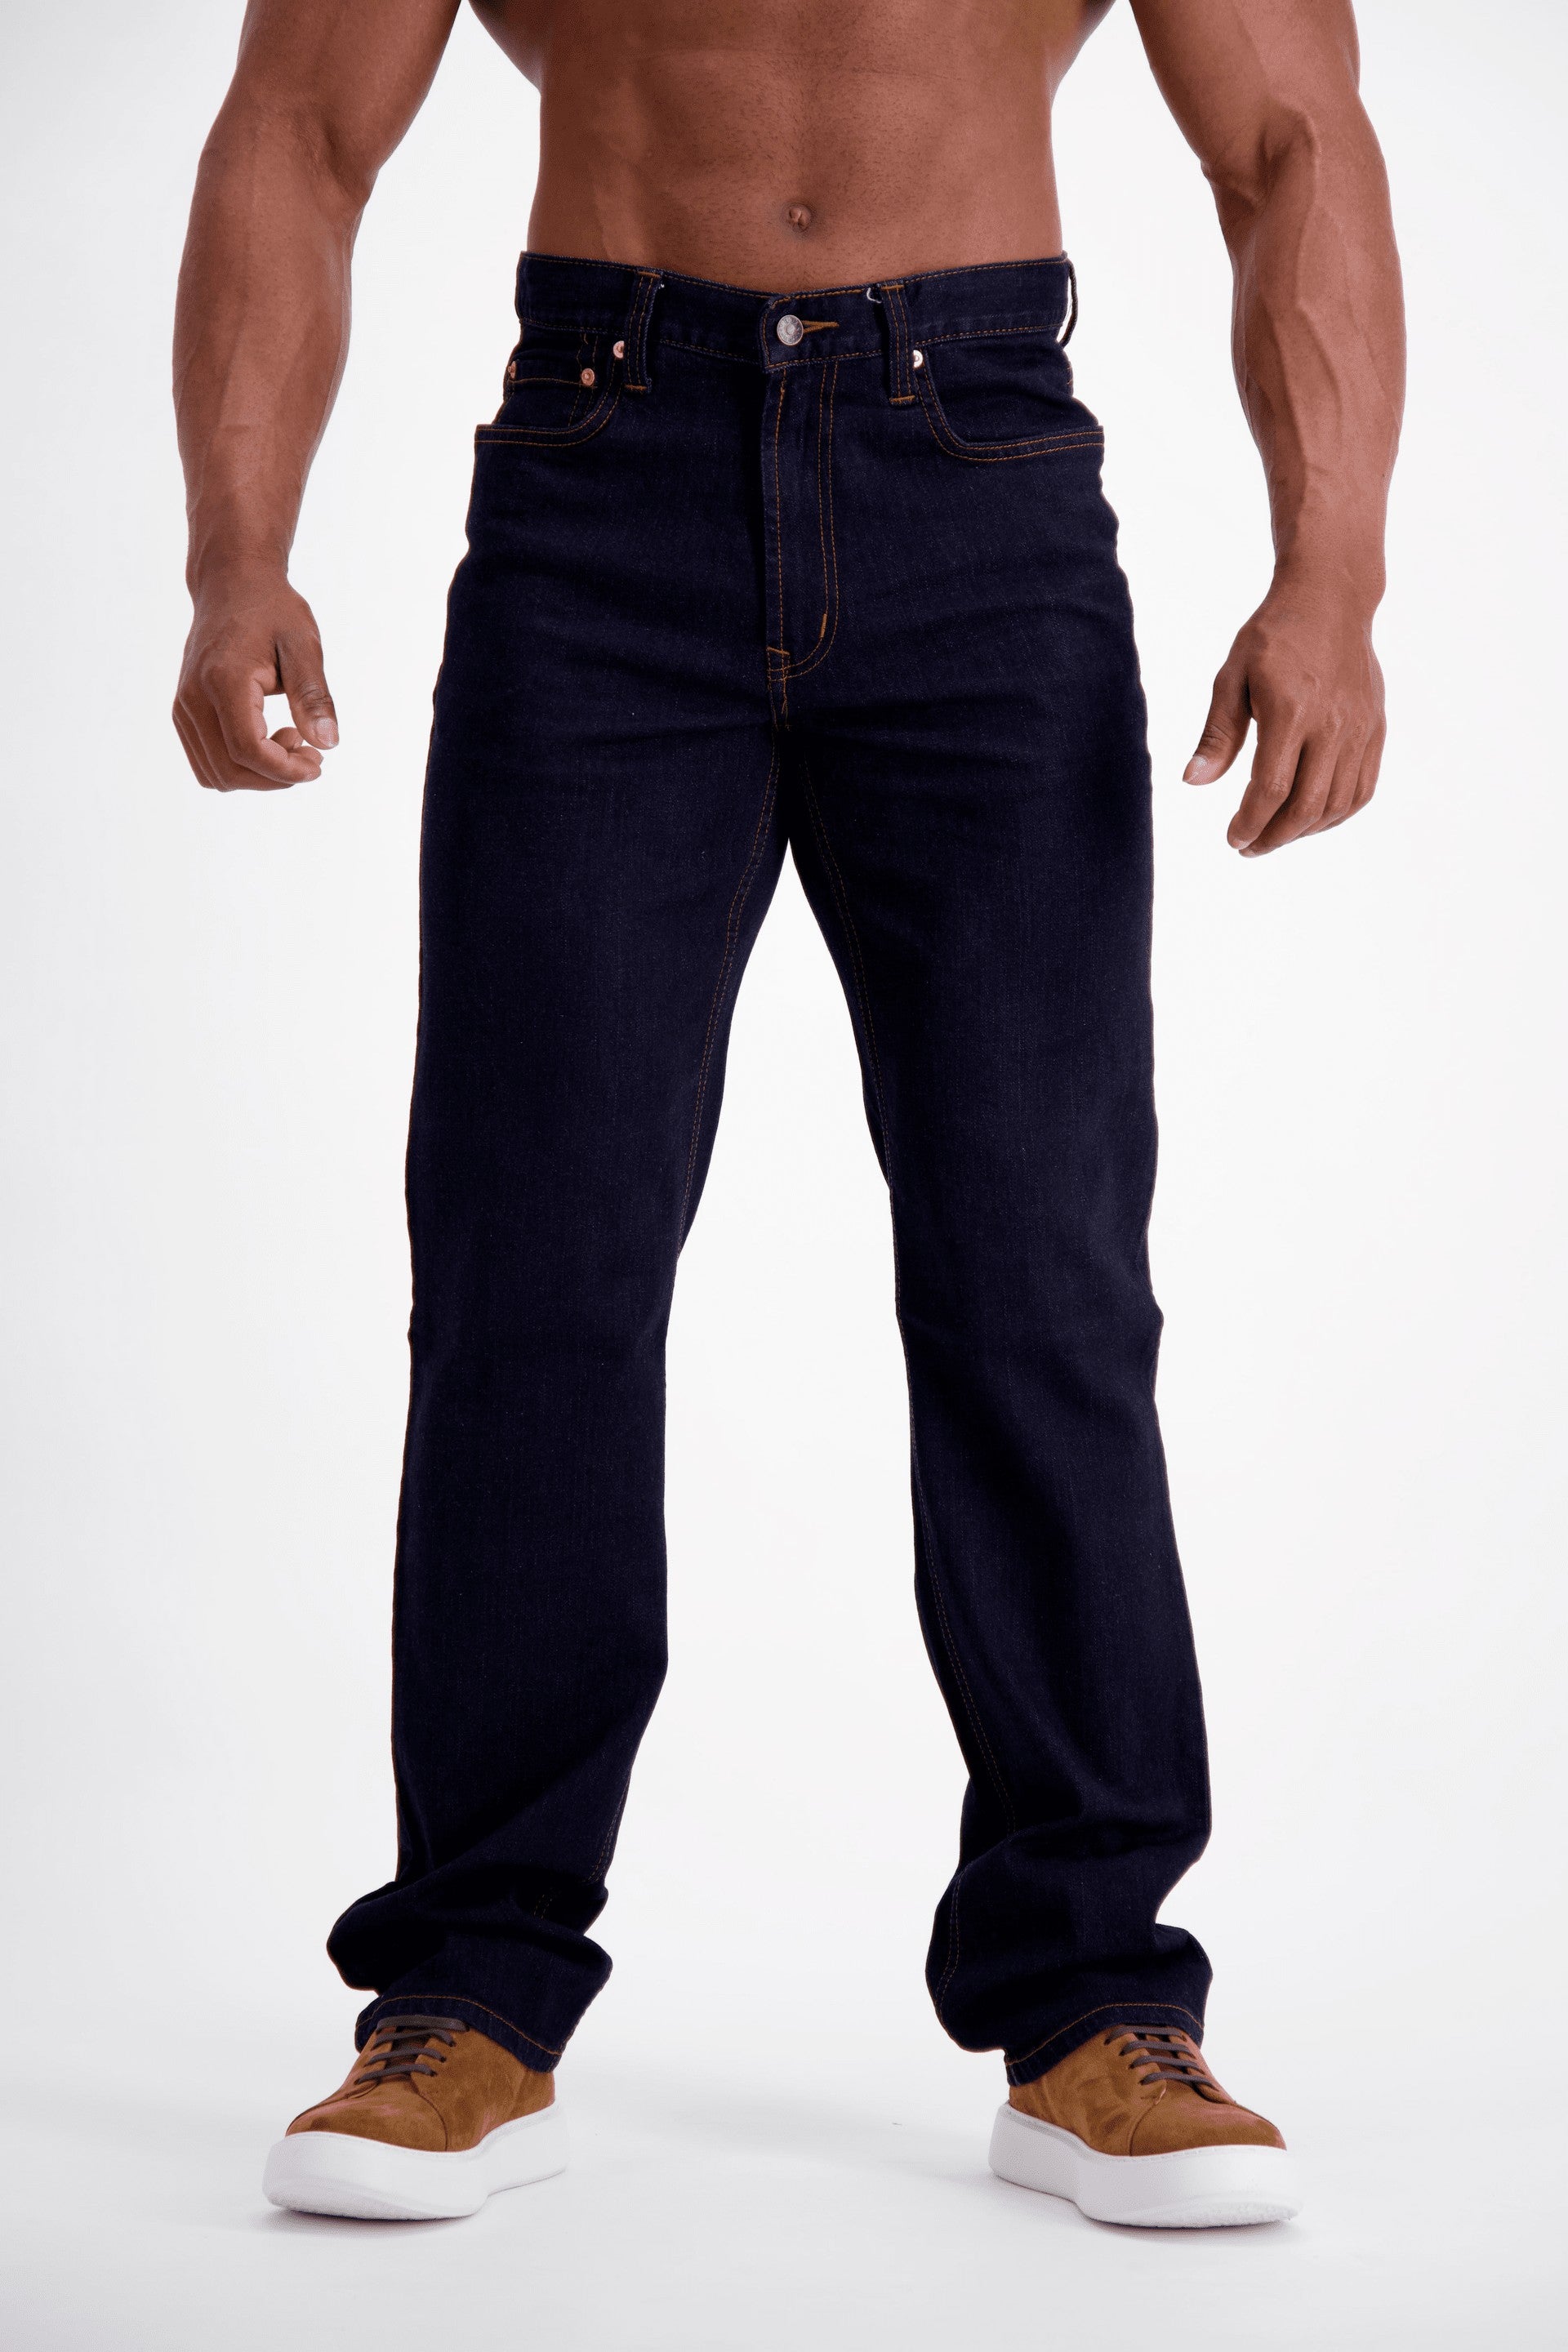 Texan 100% Cotton Dark Rinse Denim Jeans | Outback Supply Co